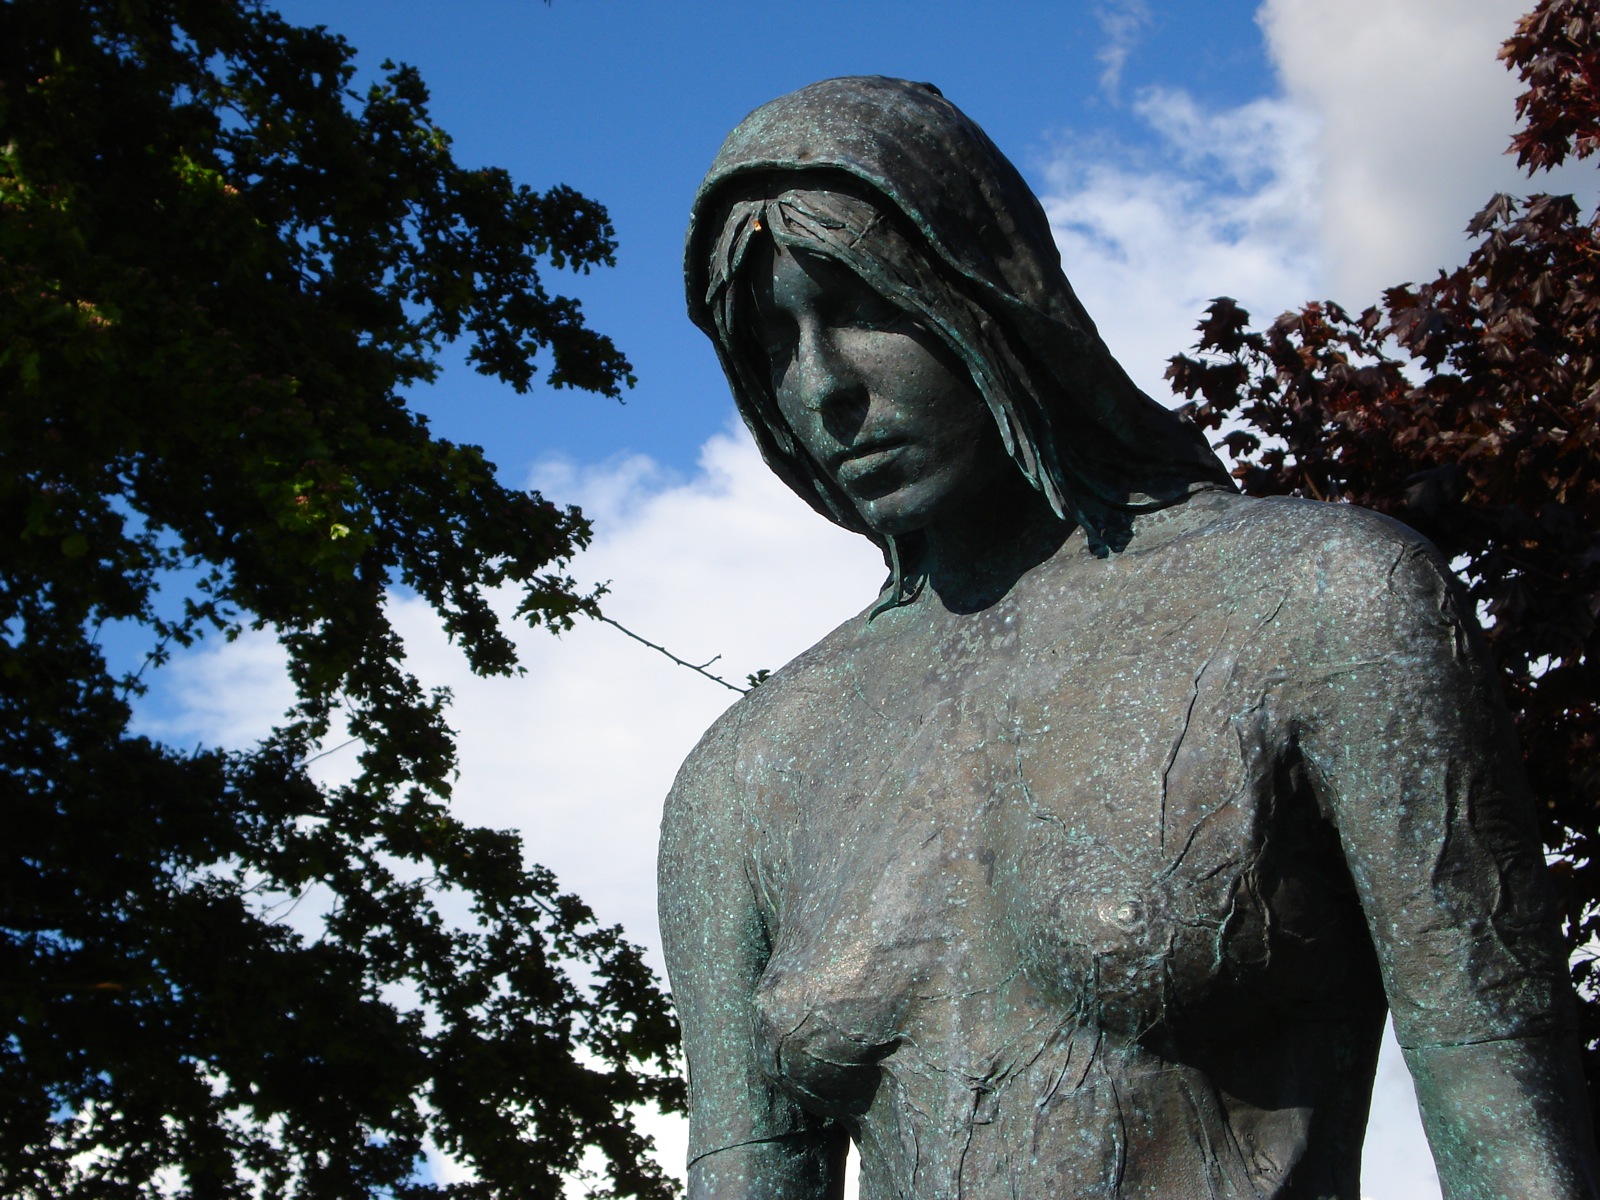 the body of a woman is cast in bronze, with some trees behind